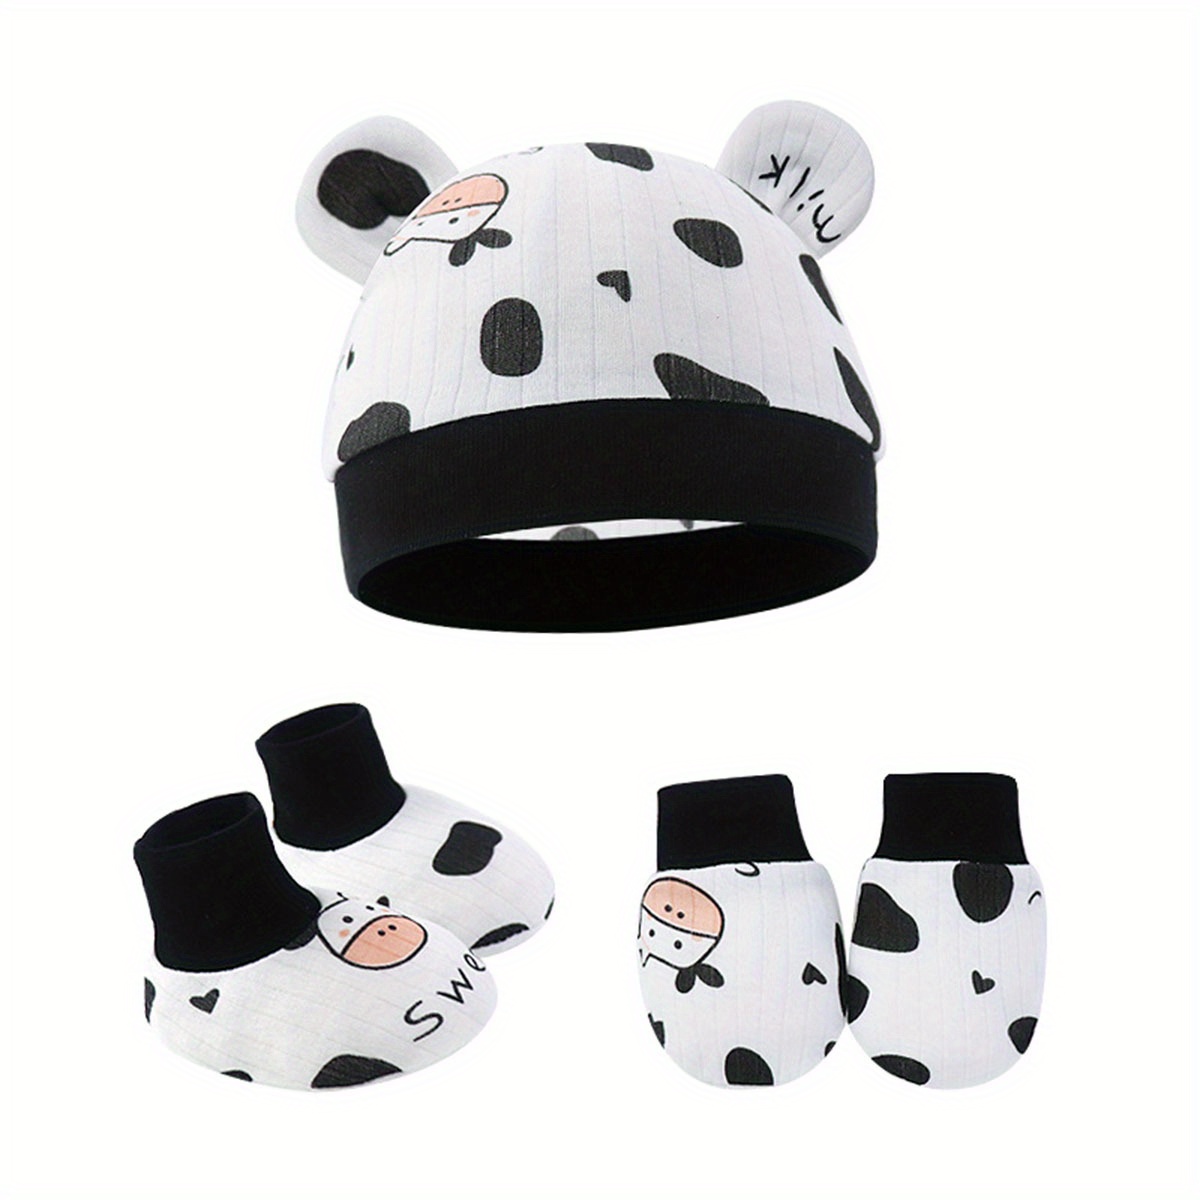 3pcs baby girls cute cartoon breathable soft hat socks gloves set hair accessories for gift details 2